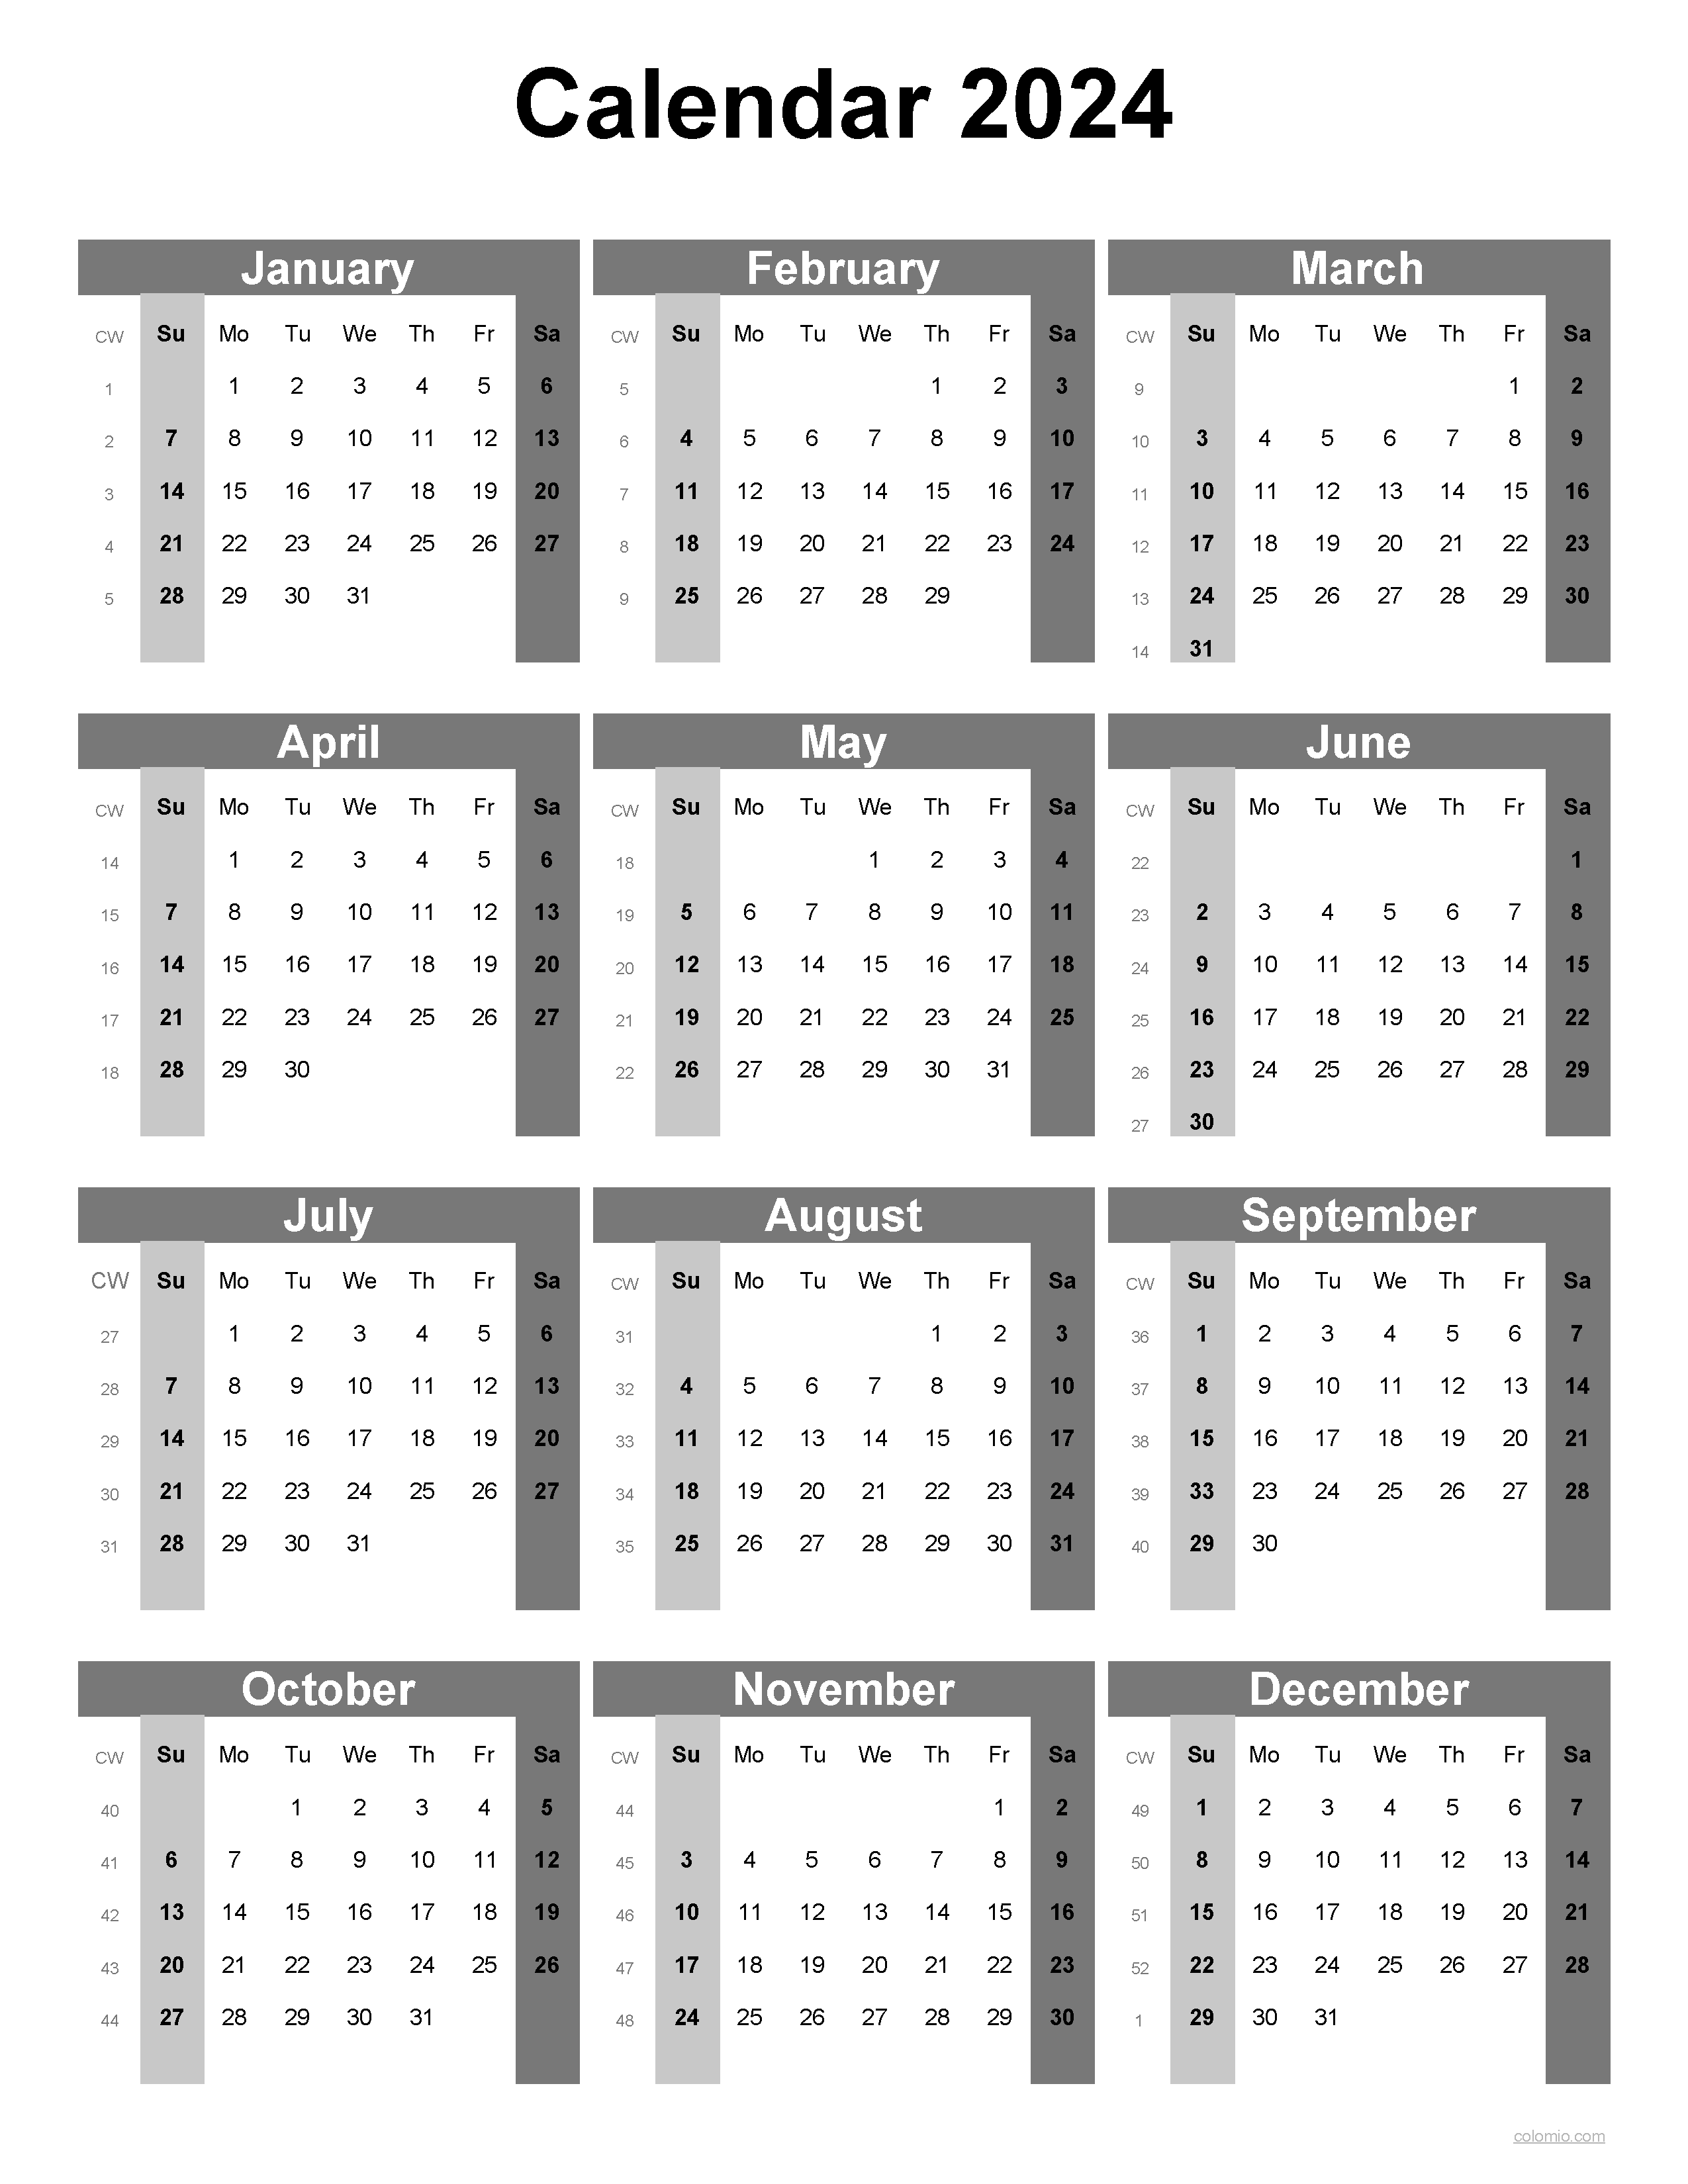 2024 Calendar Printable, ✓ Pdf, Excel And Image File - Free in Free Printable Calendar 2024 With Holidays 2 Column